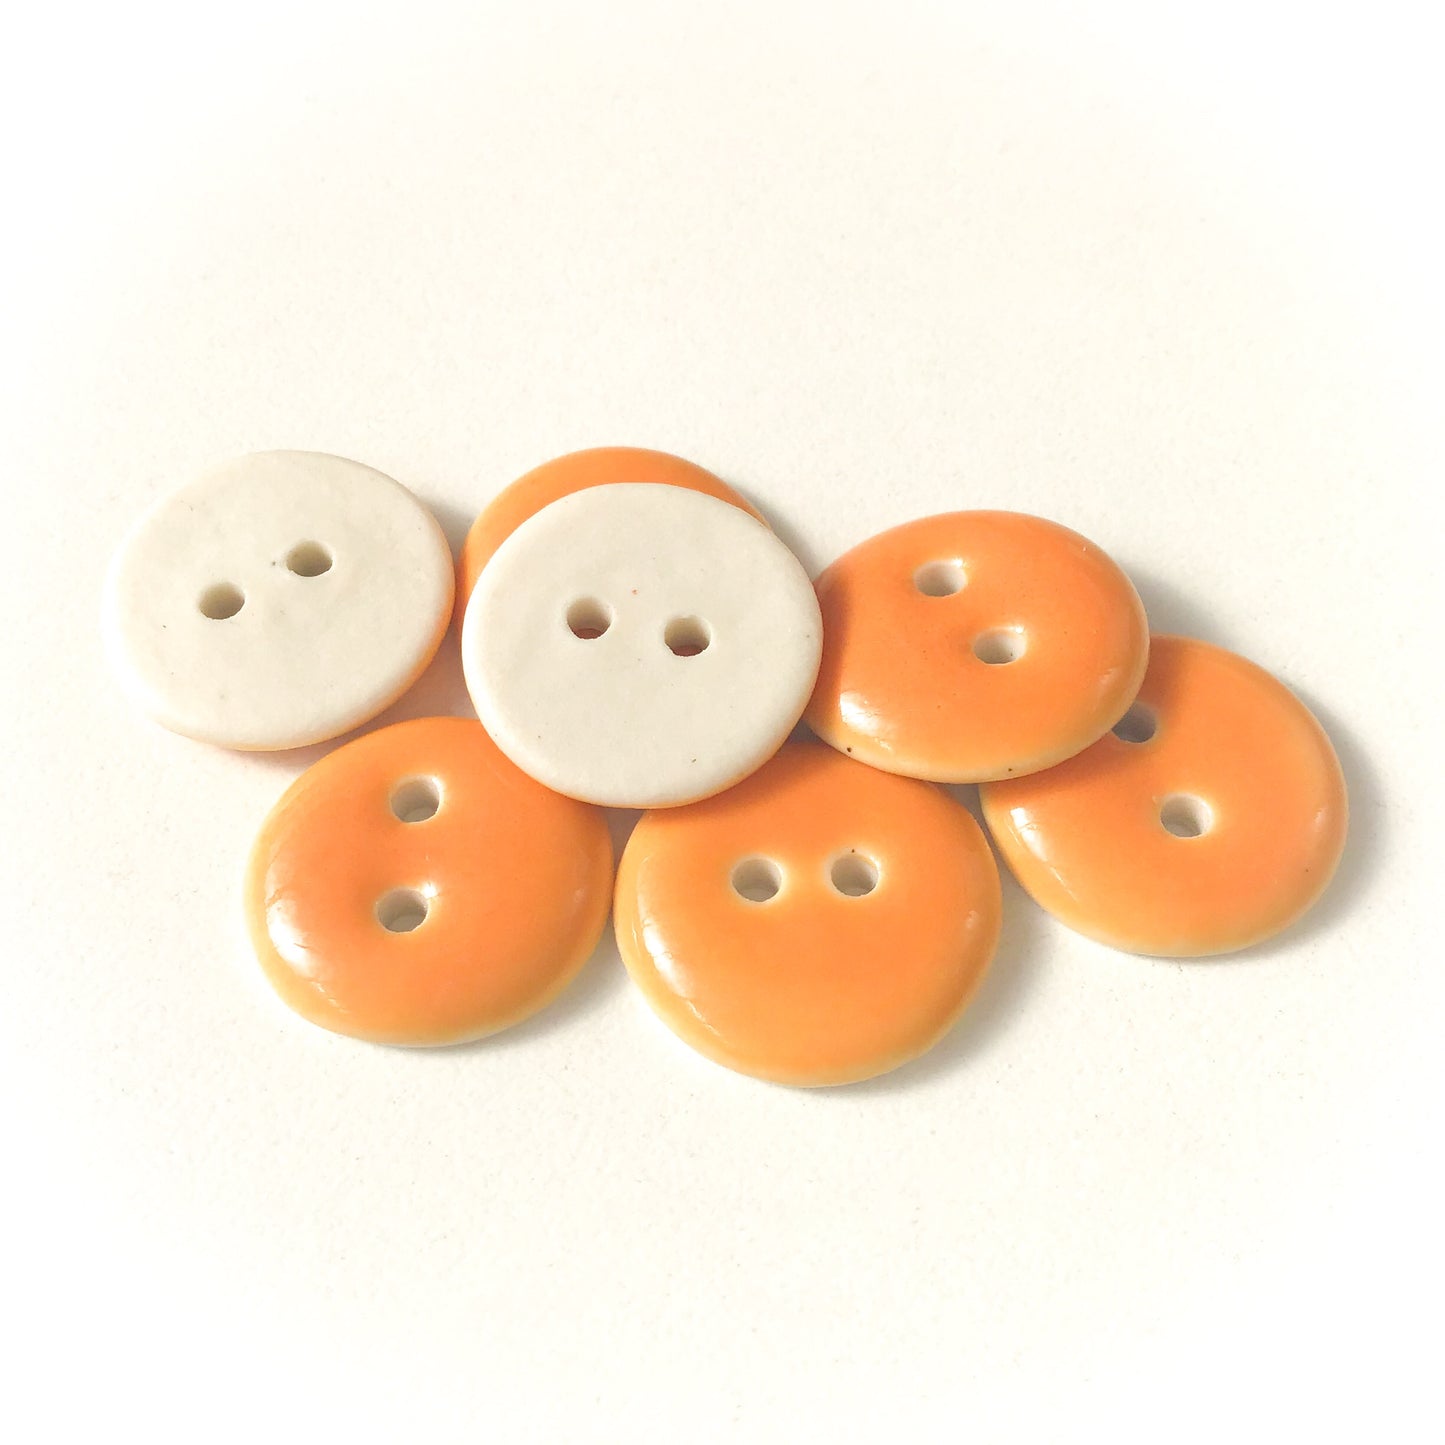 Bright Orange Porcelain Buttons - Orange Clay Buttons - 11/16" - 7 Pack